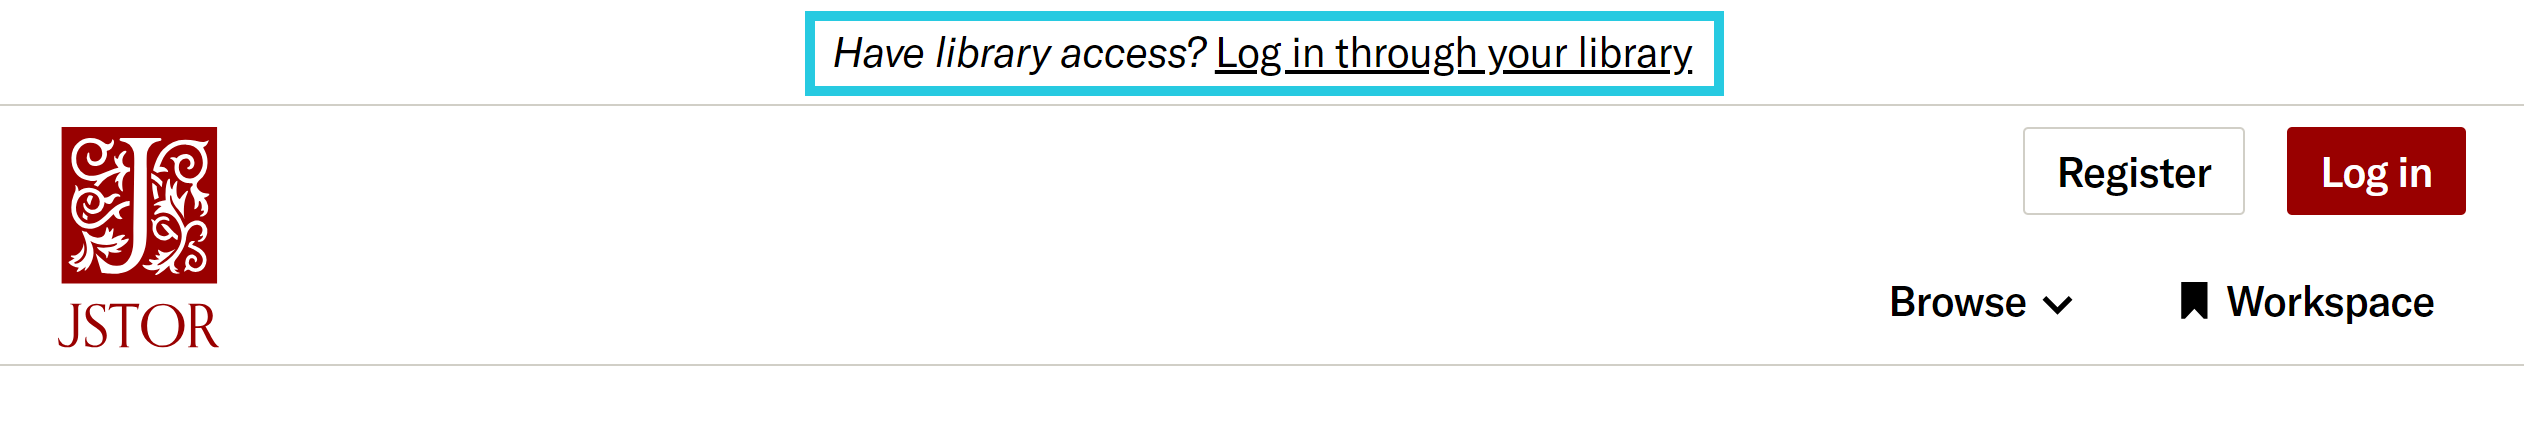 Institutional login message at the top of JSTOR